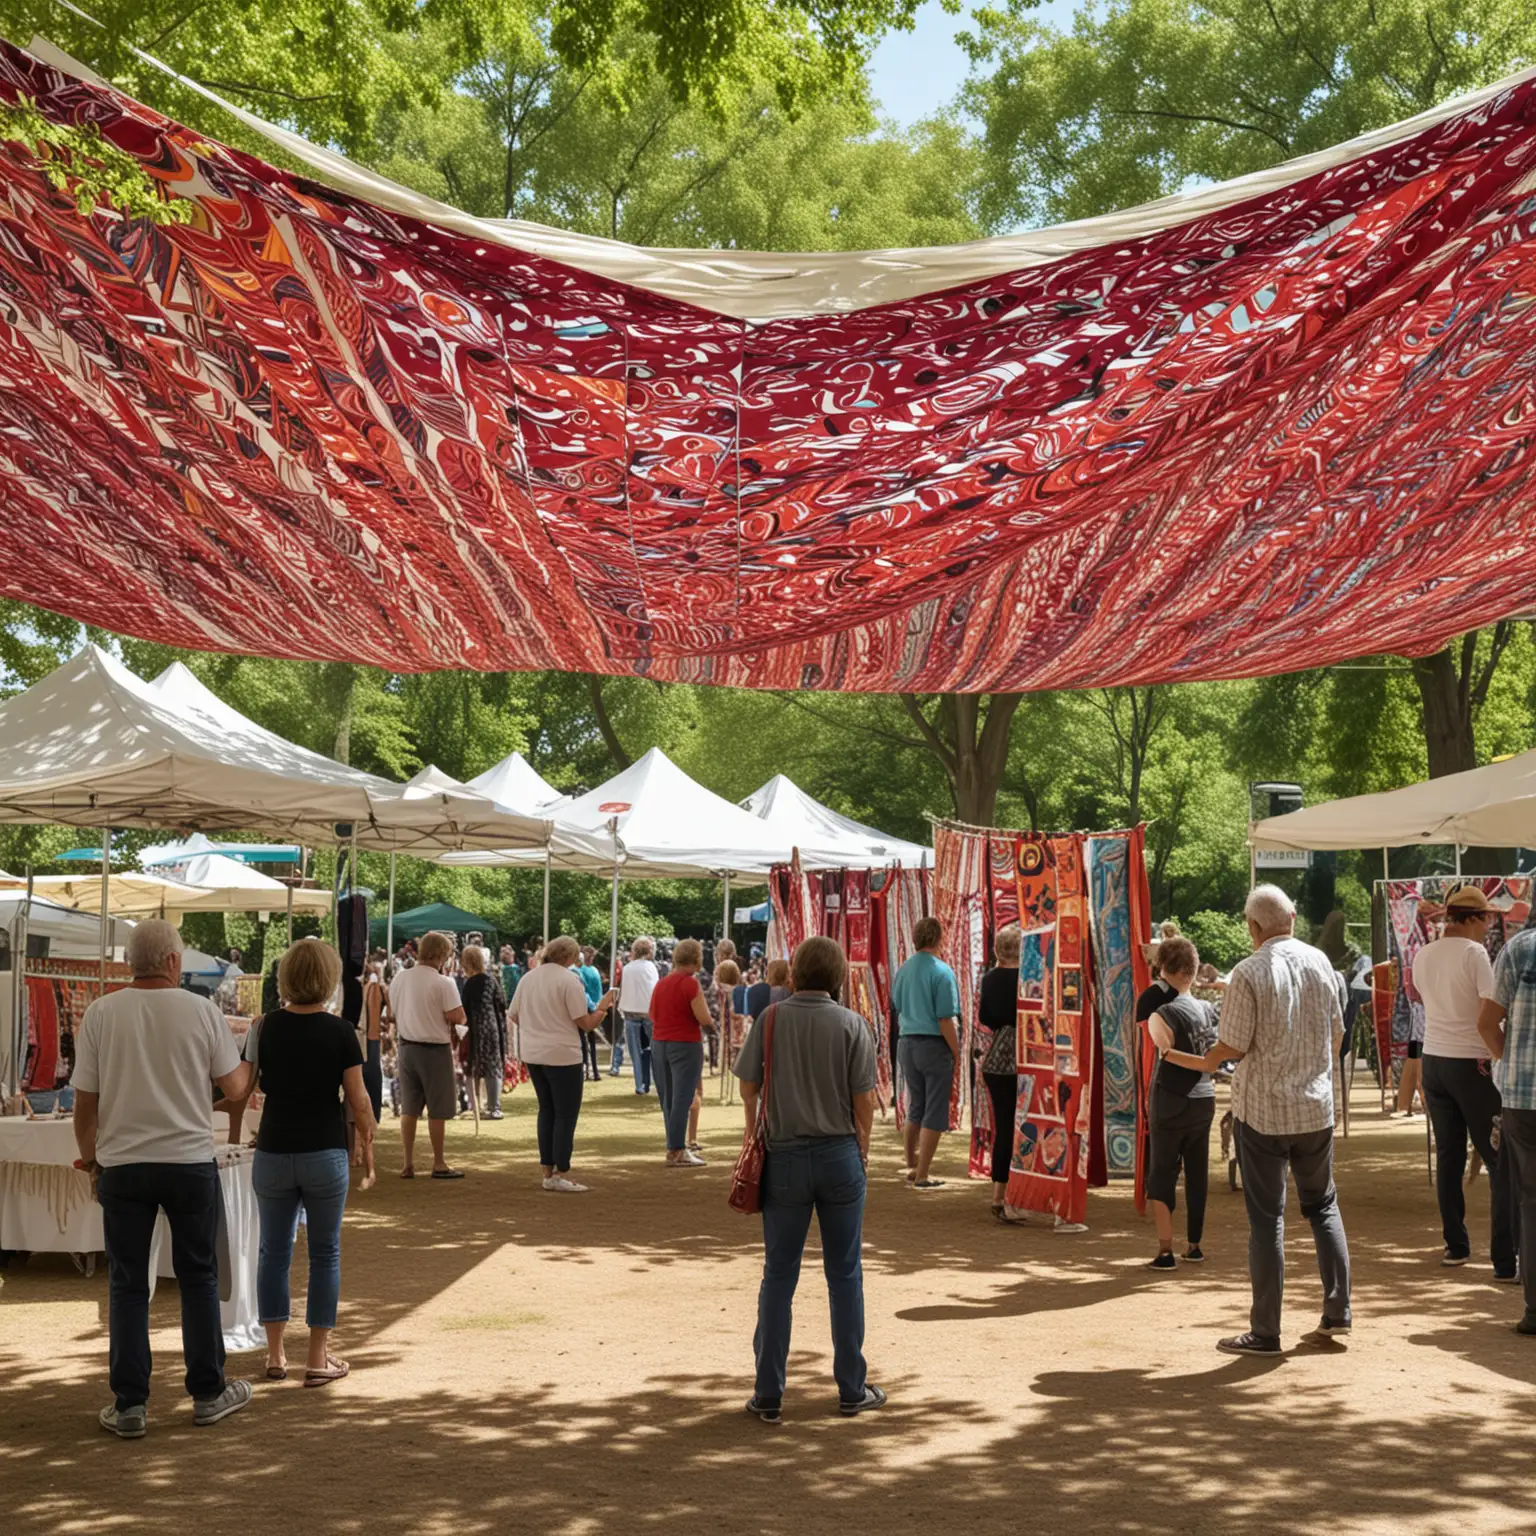 people enjoying the textile art exhibition at the local park art fair under a large canopy. 